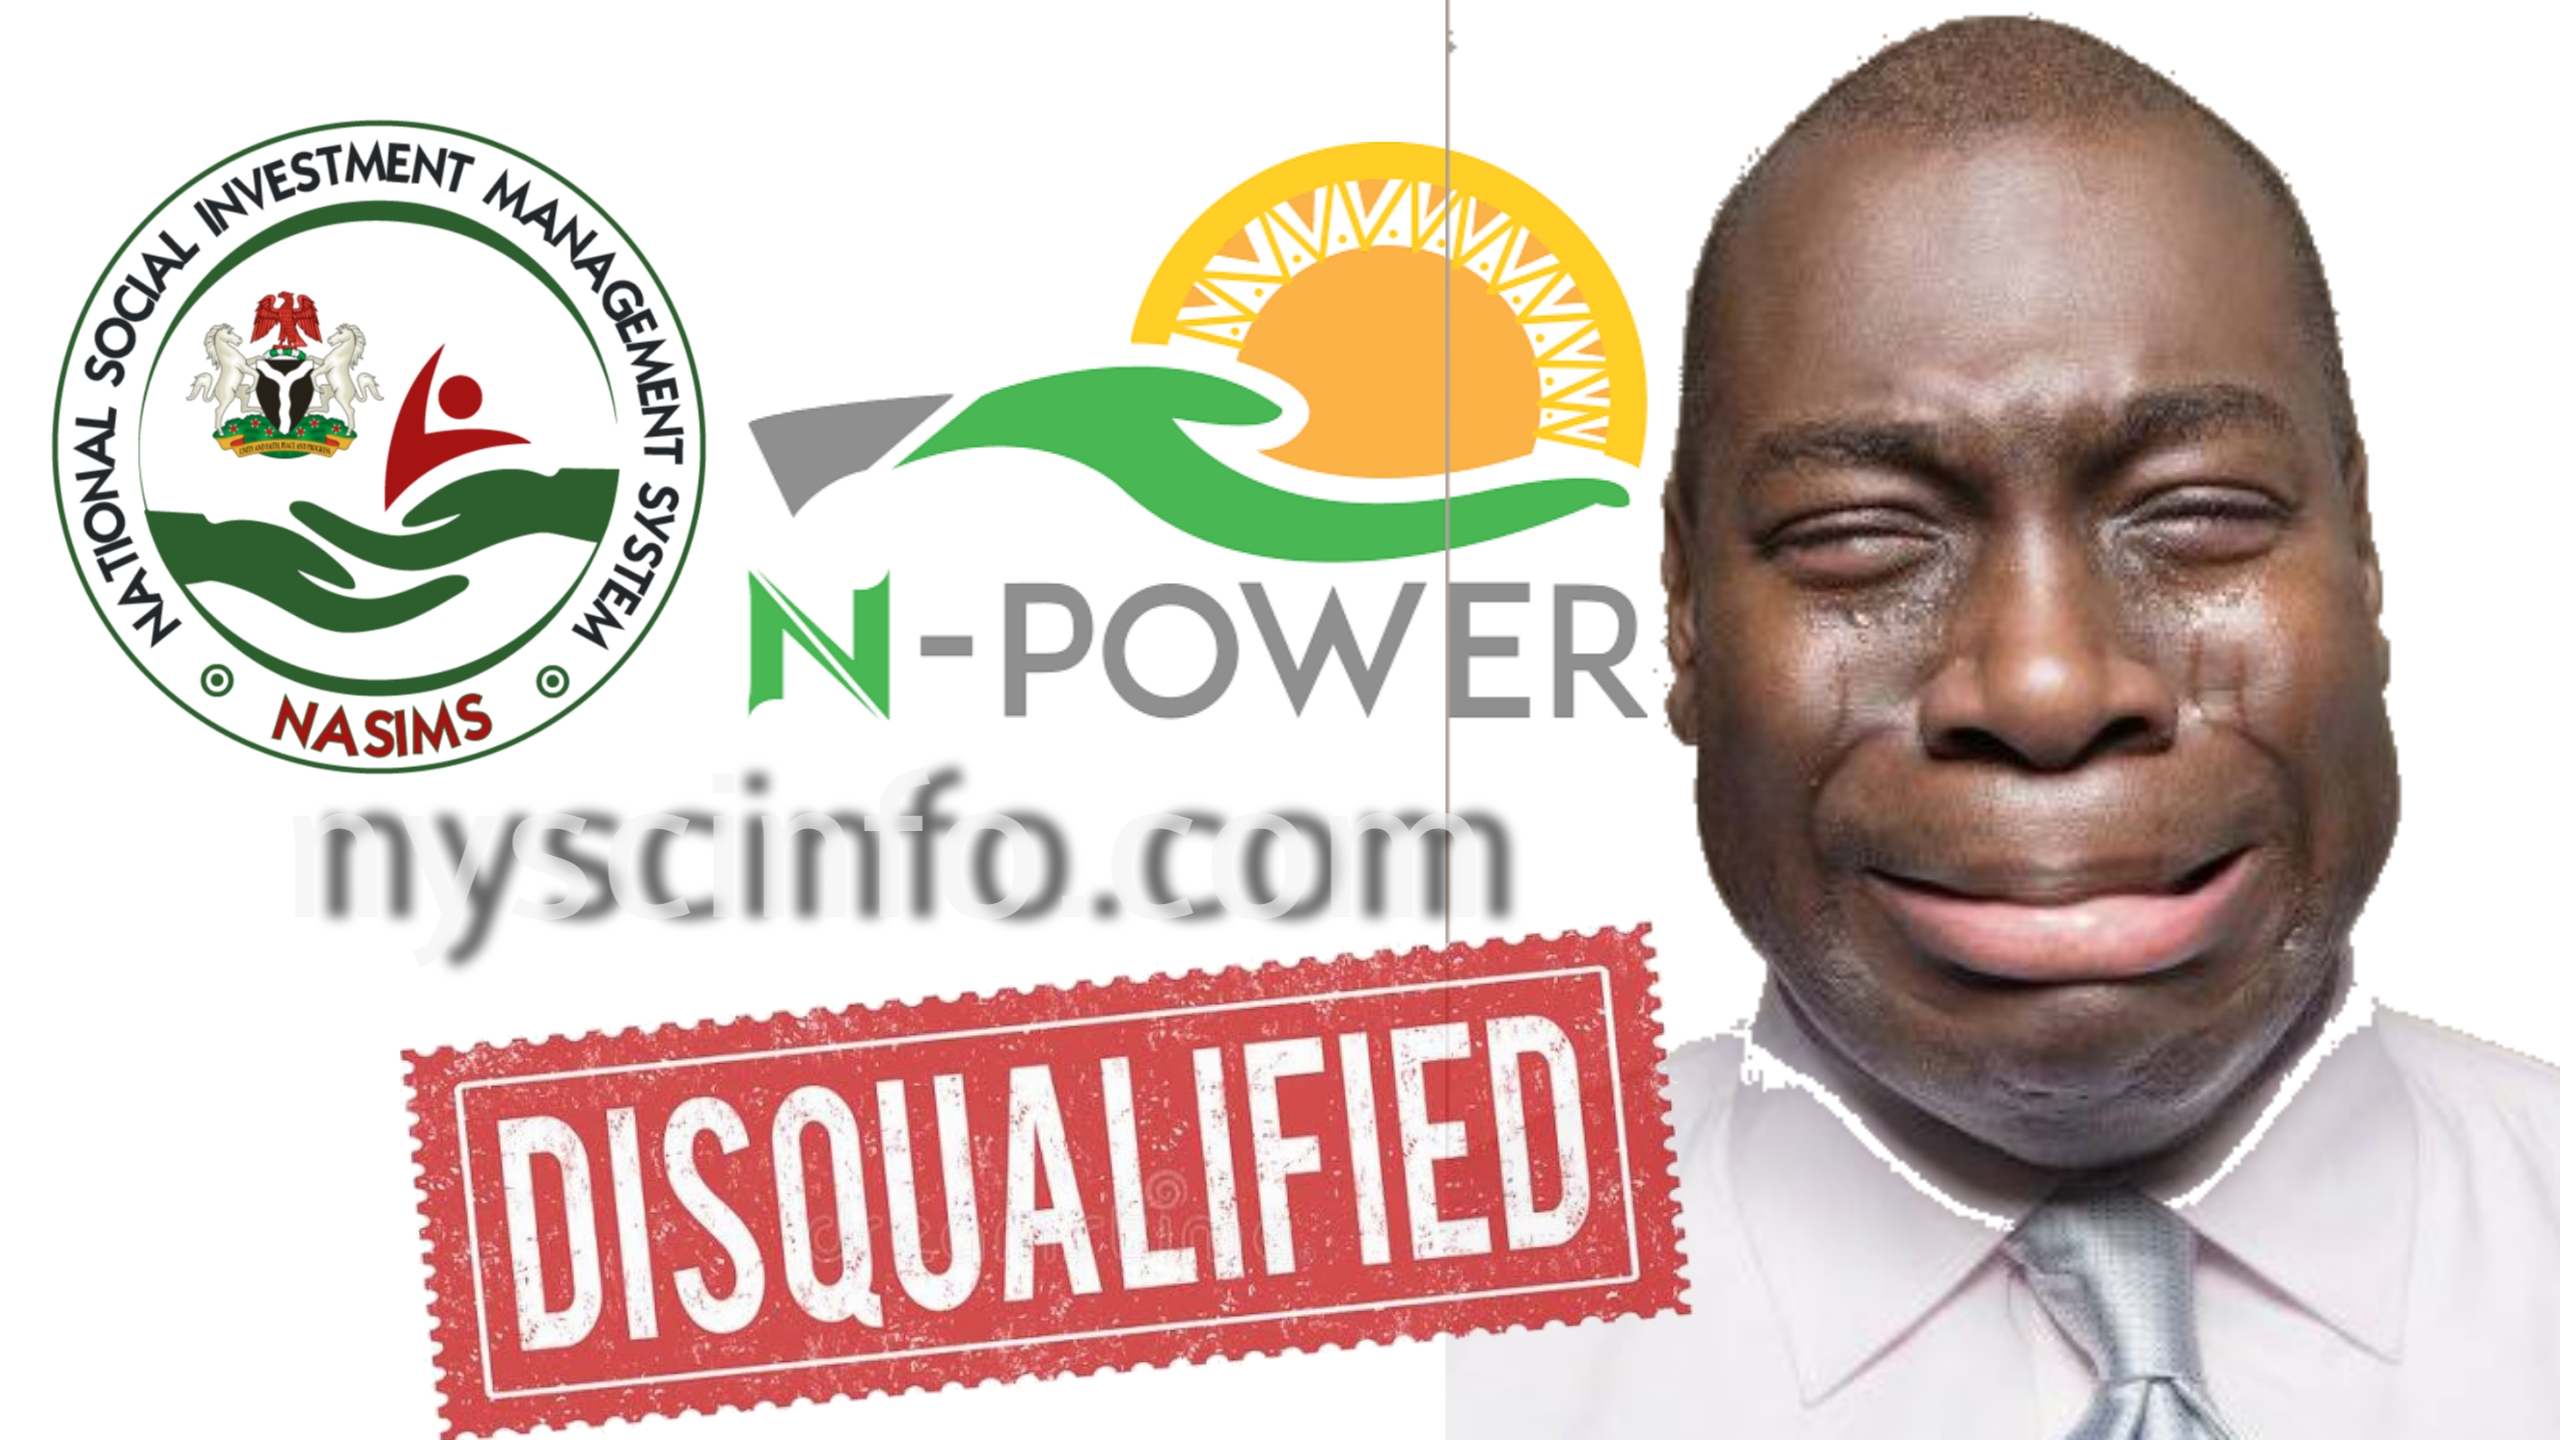 5 Things that Will Disqualify You From Npower Batch C